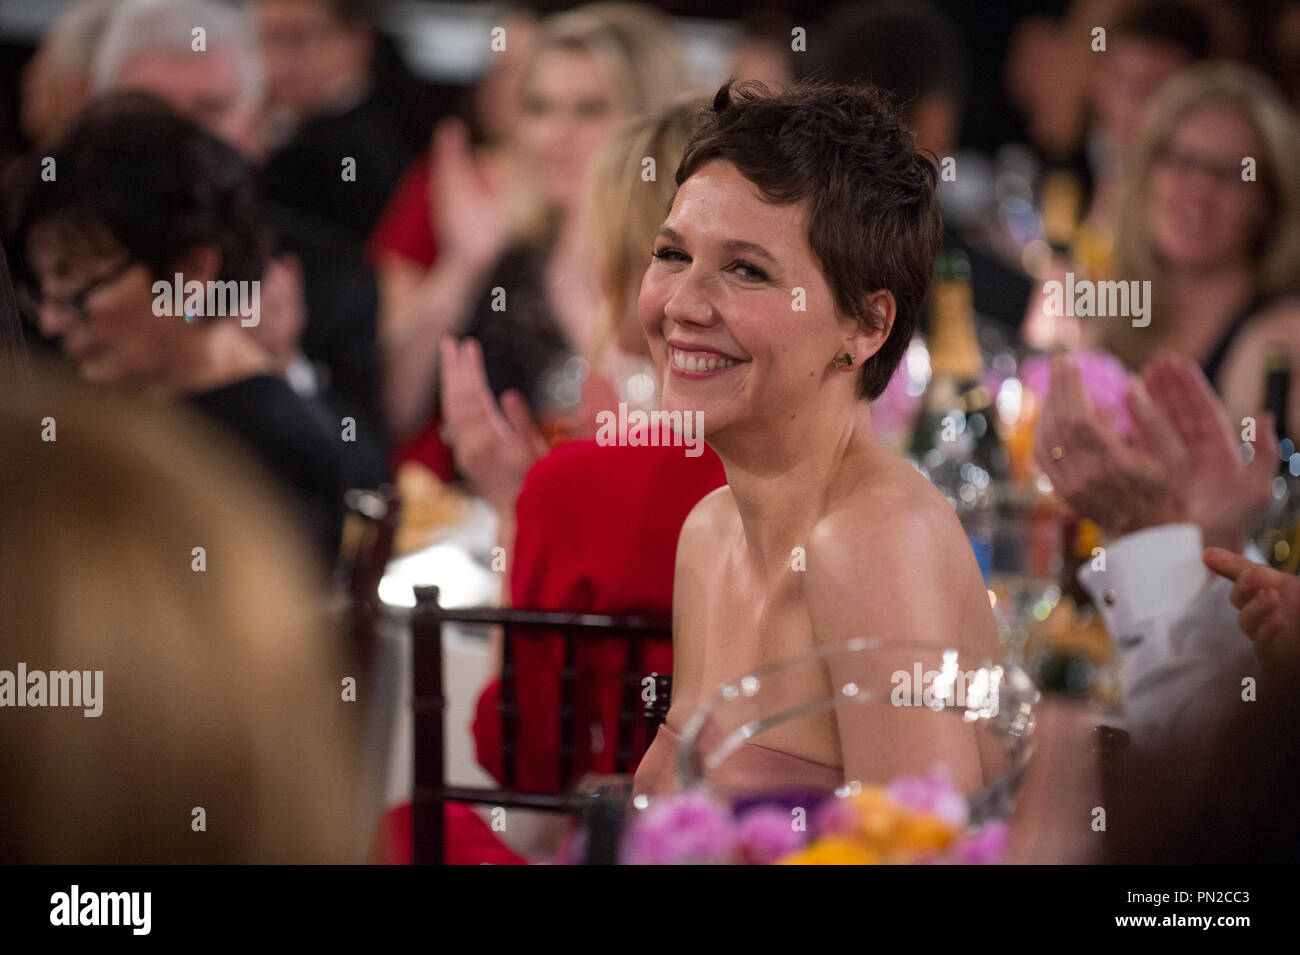 Maggie Gyllenhaal is awarded the Golden Globe Award for BEST PERFORMANCE BY AN ACTRESS IN A MINI-SERIES OR MOTION PICTURE MADE FOR TELEVISION for her role in “THE HONORABLE WOMAN” at the 72nd Annual Golden Globe Awards at the Beverly Hilton in Beverly Hills, CA on Sunday, January 11, 2015.  File Reference # 32536 535JRC  For Editorial Use Only -  All Rights Reserved Stock Photo